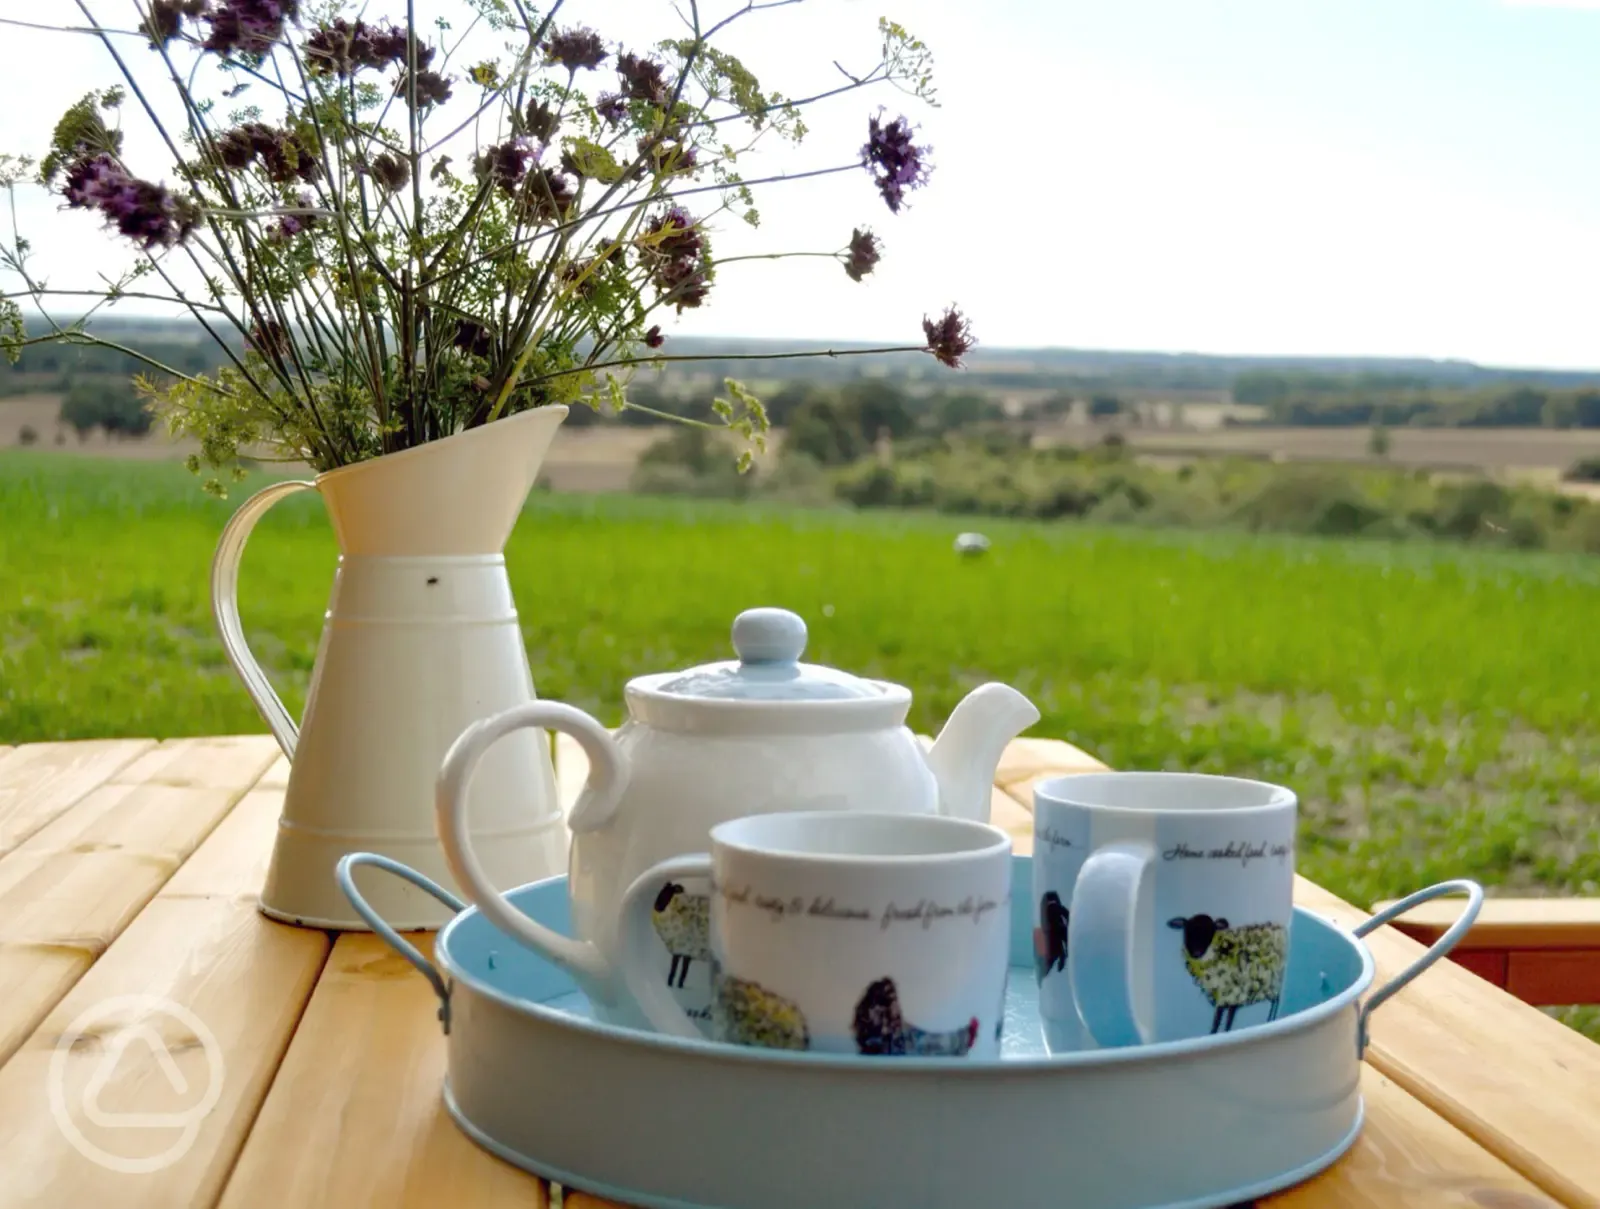 Enjoy the view and a brew at Hill View Farm